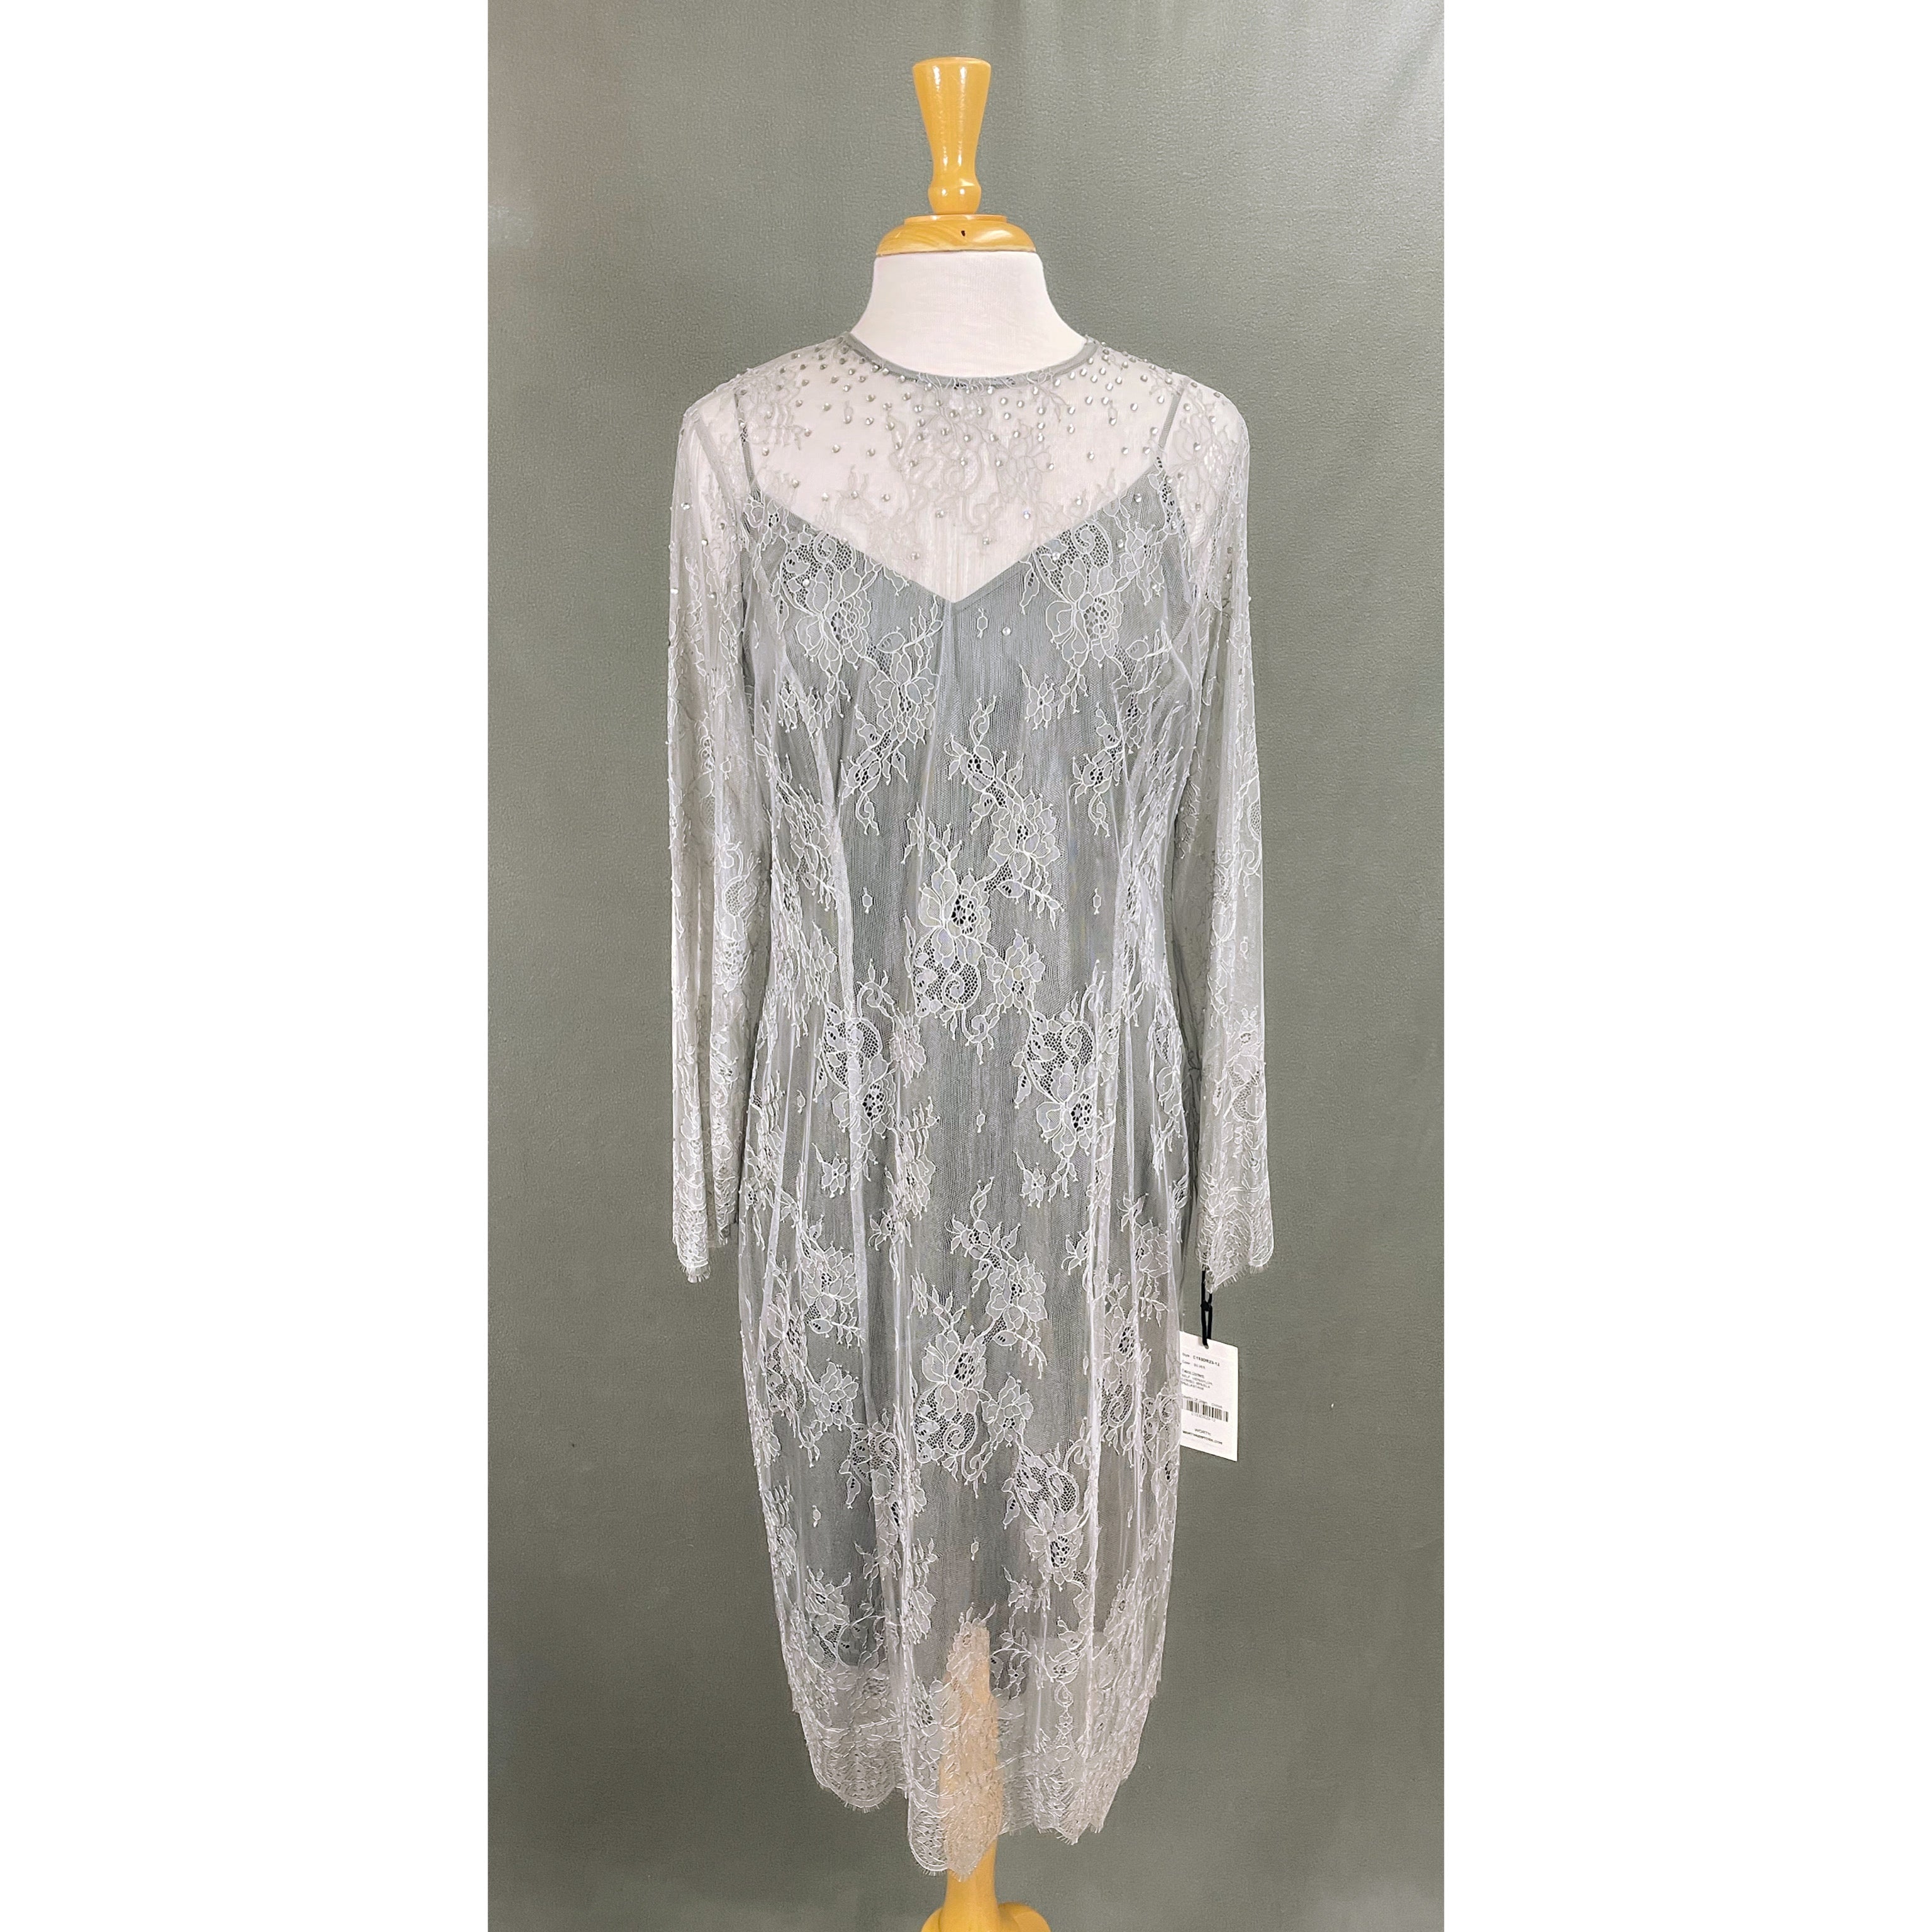 Worth silver lace dress, size 12, NEW WITH TAGS!